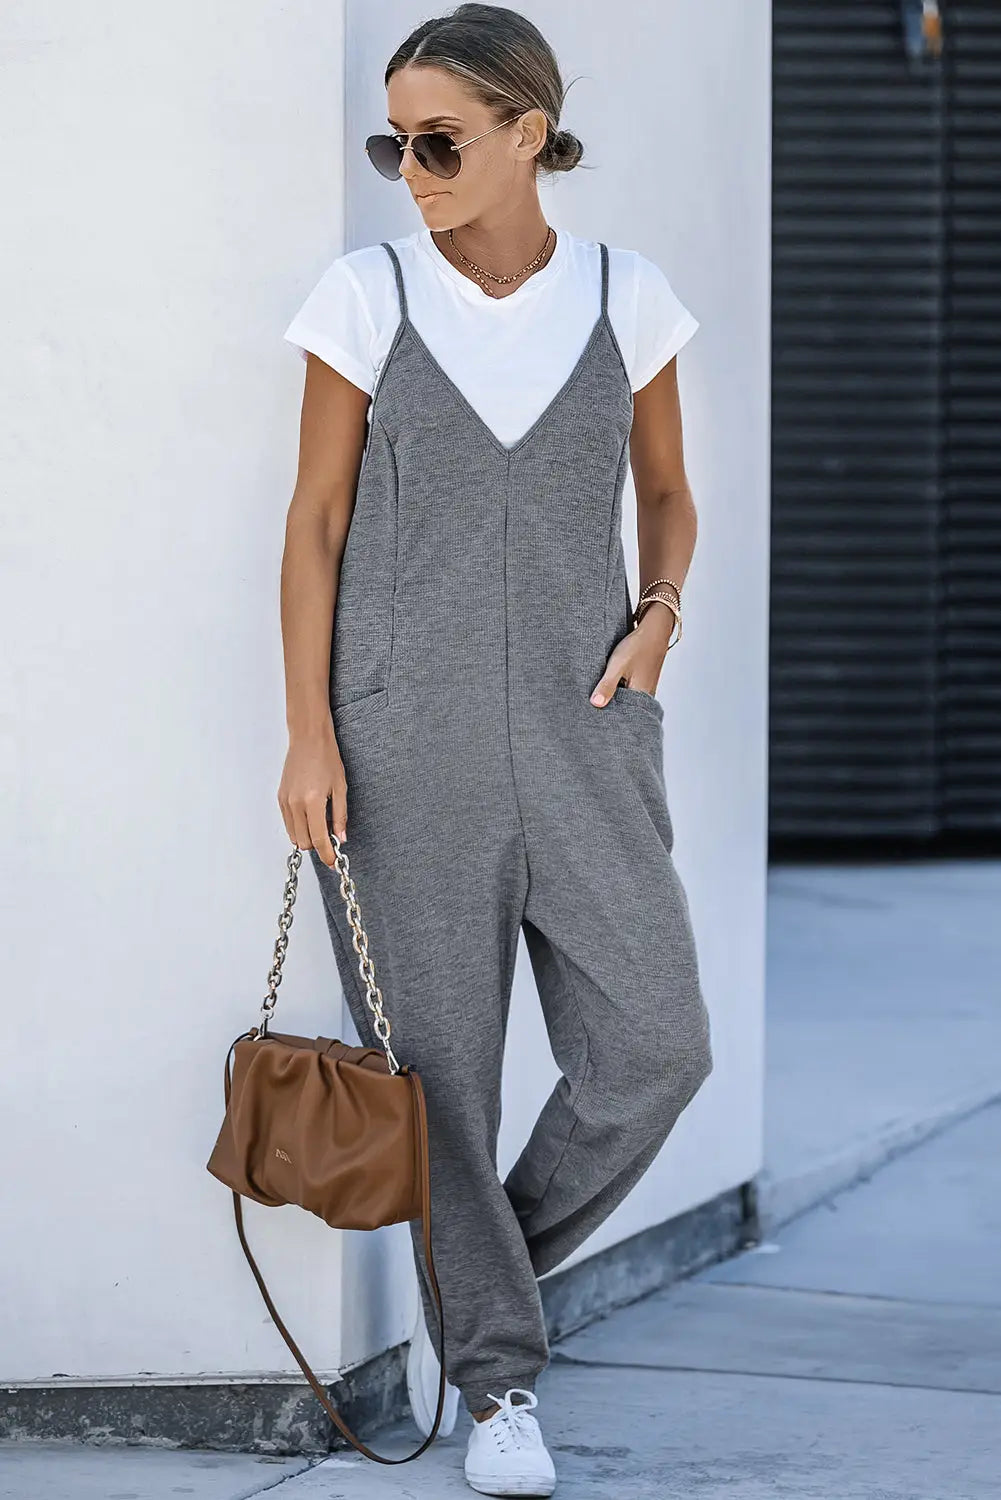 Black textured sleeveless v-neck pocketed casual jumpsuit - jumpsuits & rompers